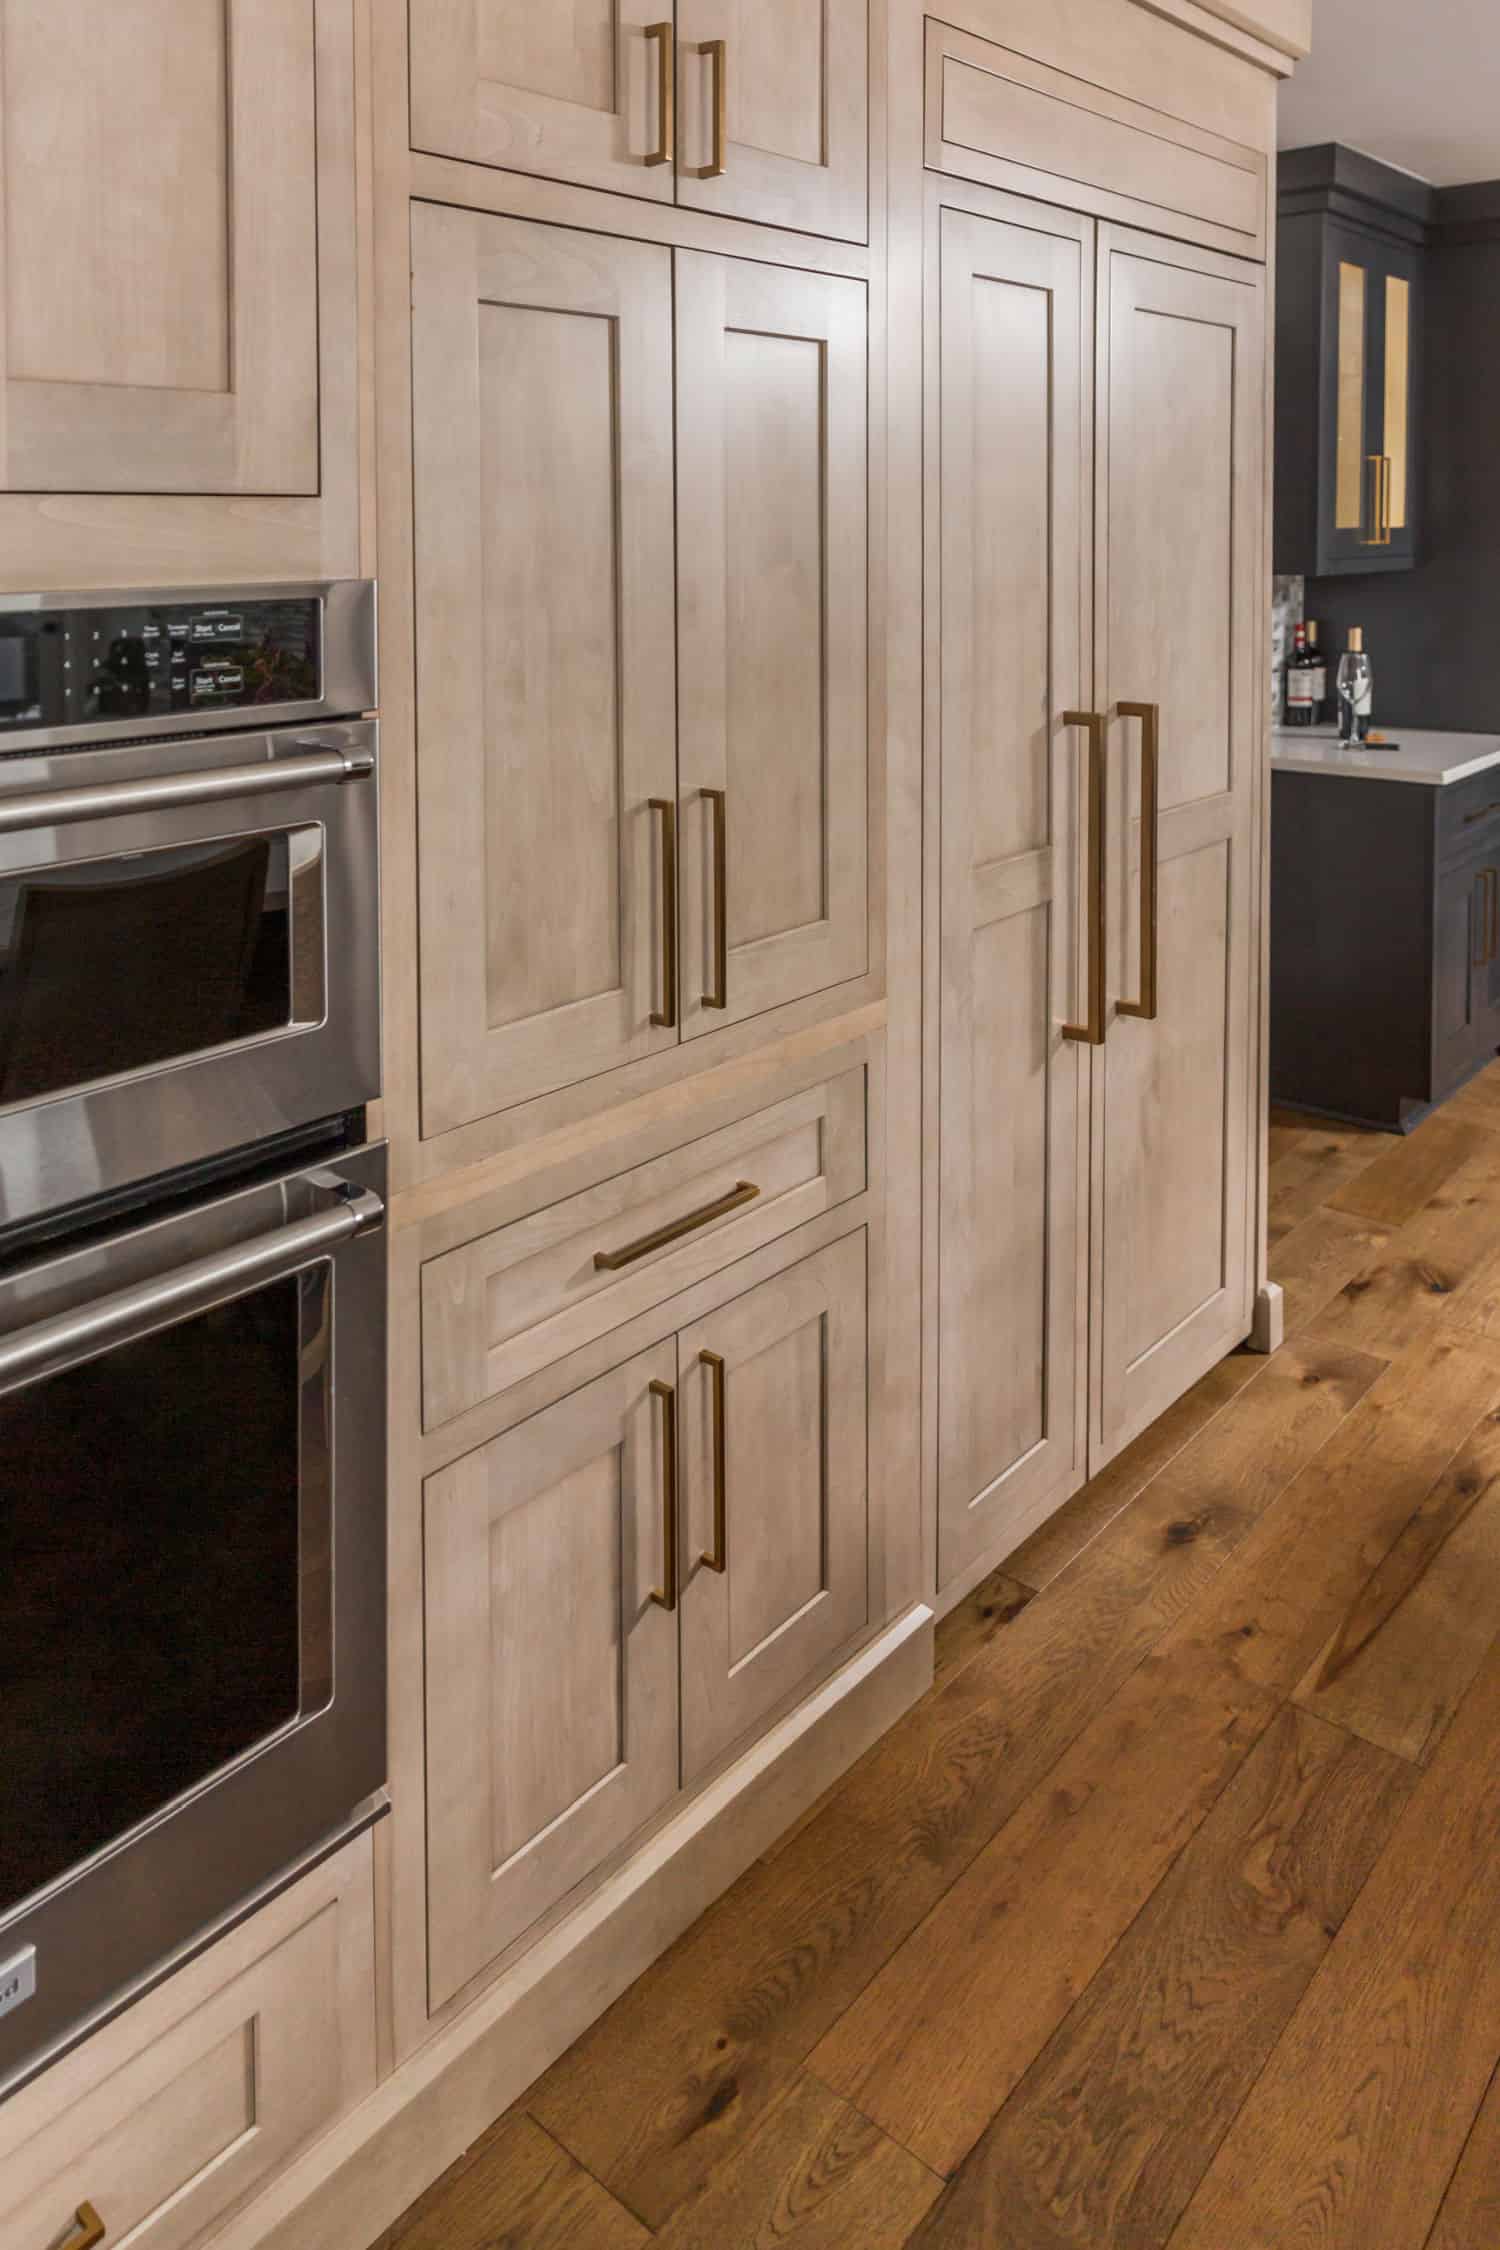 Nicholas Design Build | Remodel a kitchen with white cabinets and wood floors.